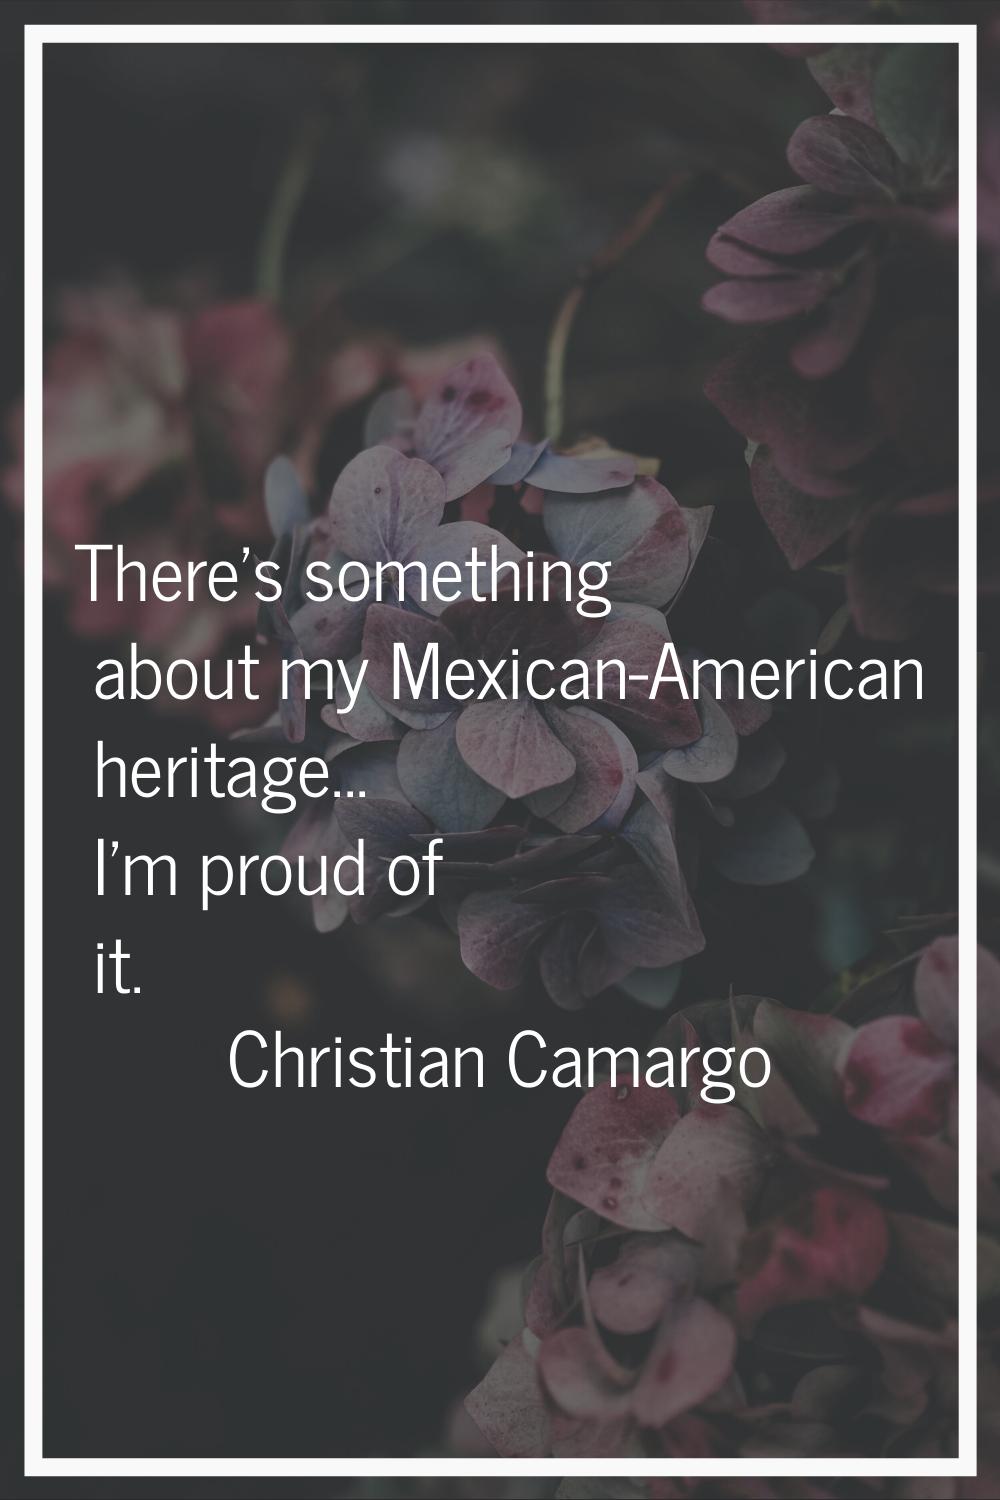 There's something about my Mexican-American heritage... I'm proud of it.